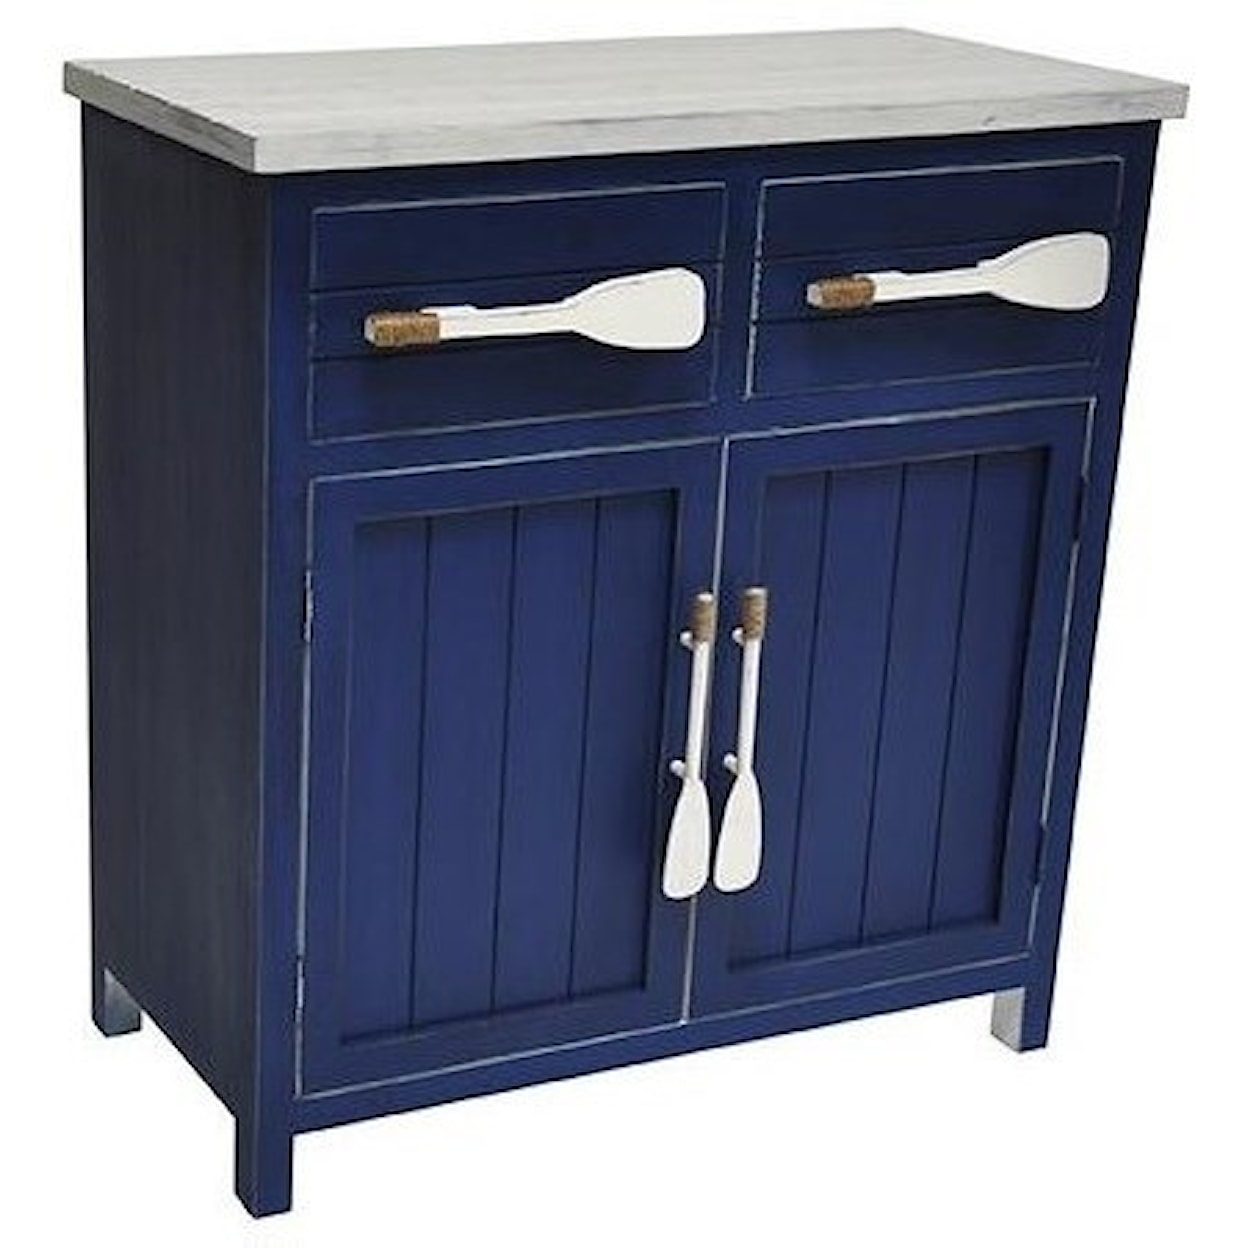 Crestview Collection Accent Furniture Cape May Azure Blue and White Paddle Cabinet